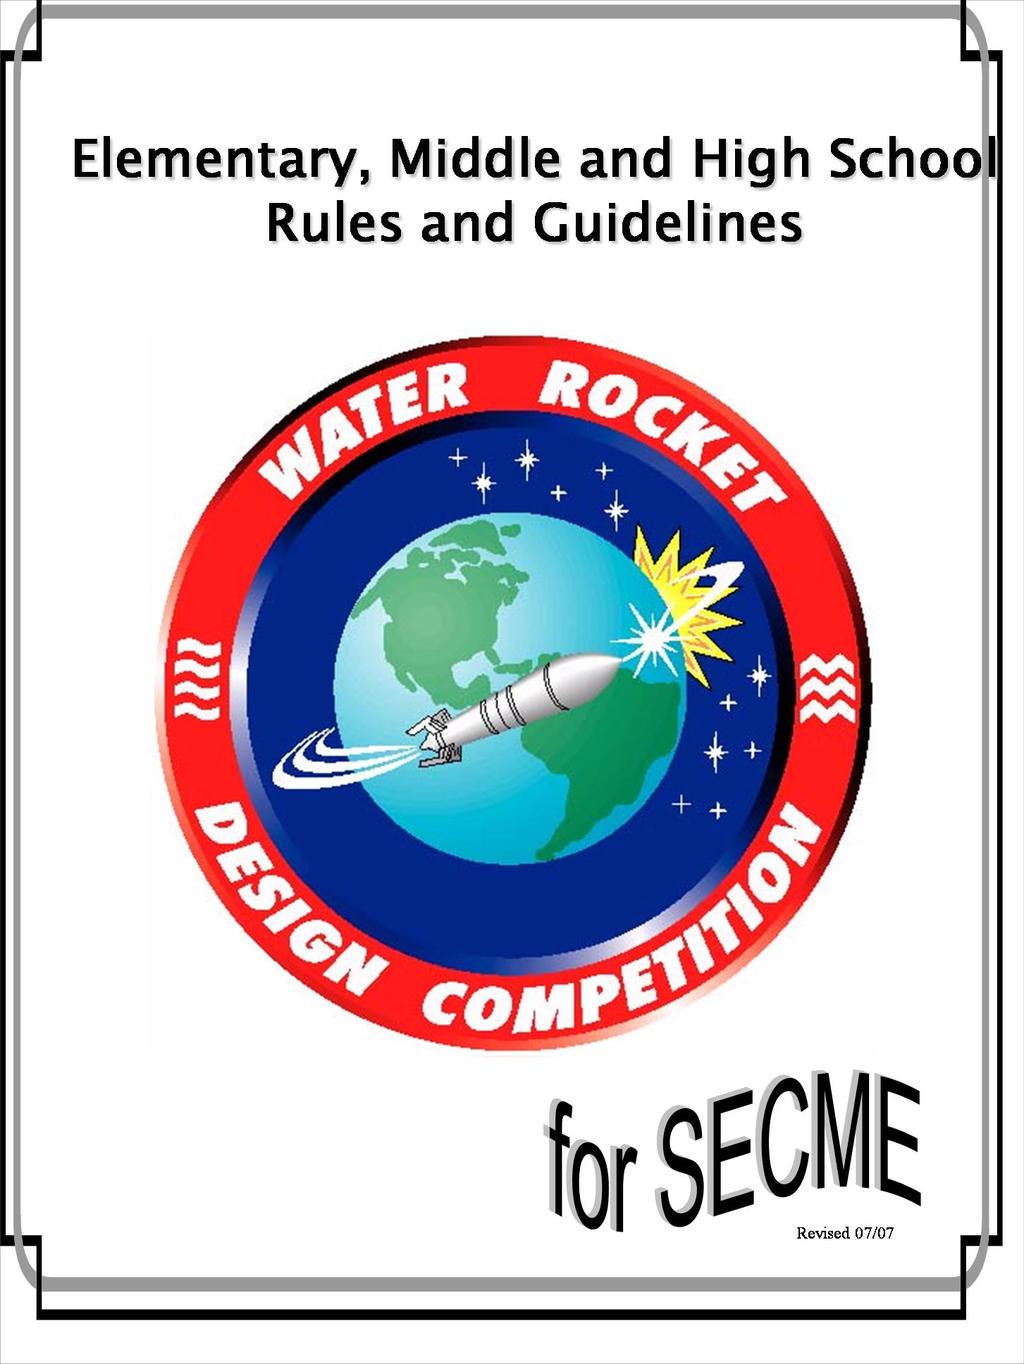 The objective of the contest is for each rocket contestant to design and construct a water rocket using a 2-liter bottle as the pressure vessel that is propelled by water and air which will be